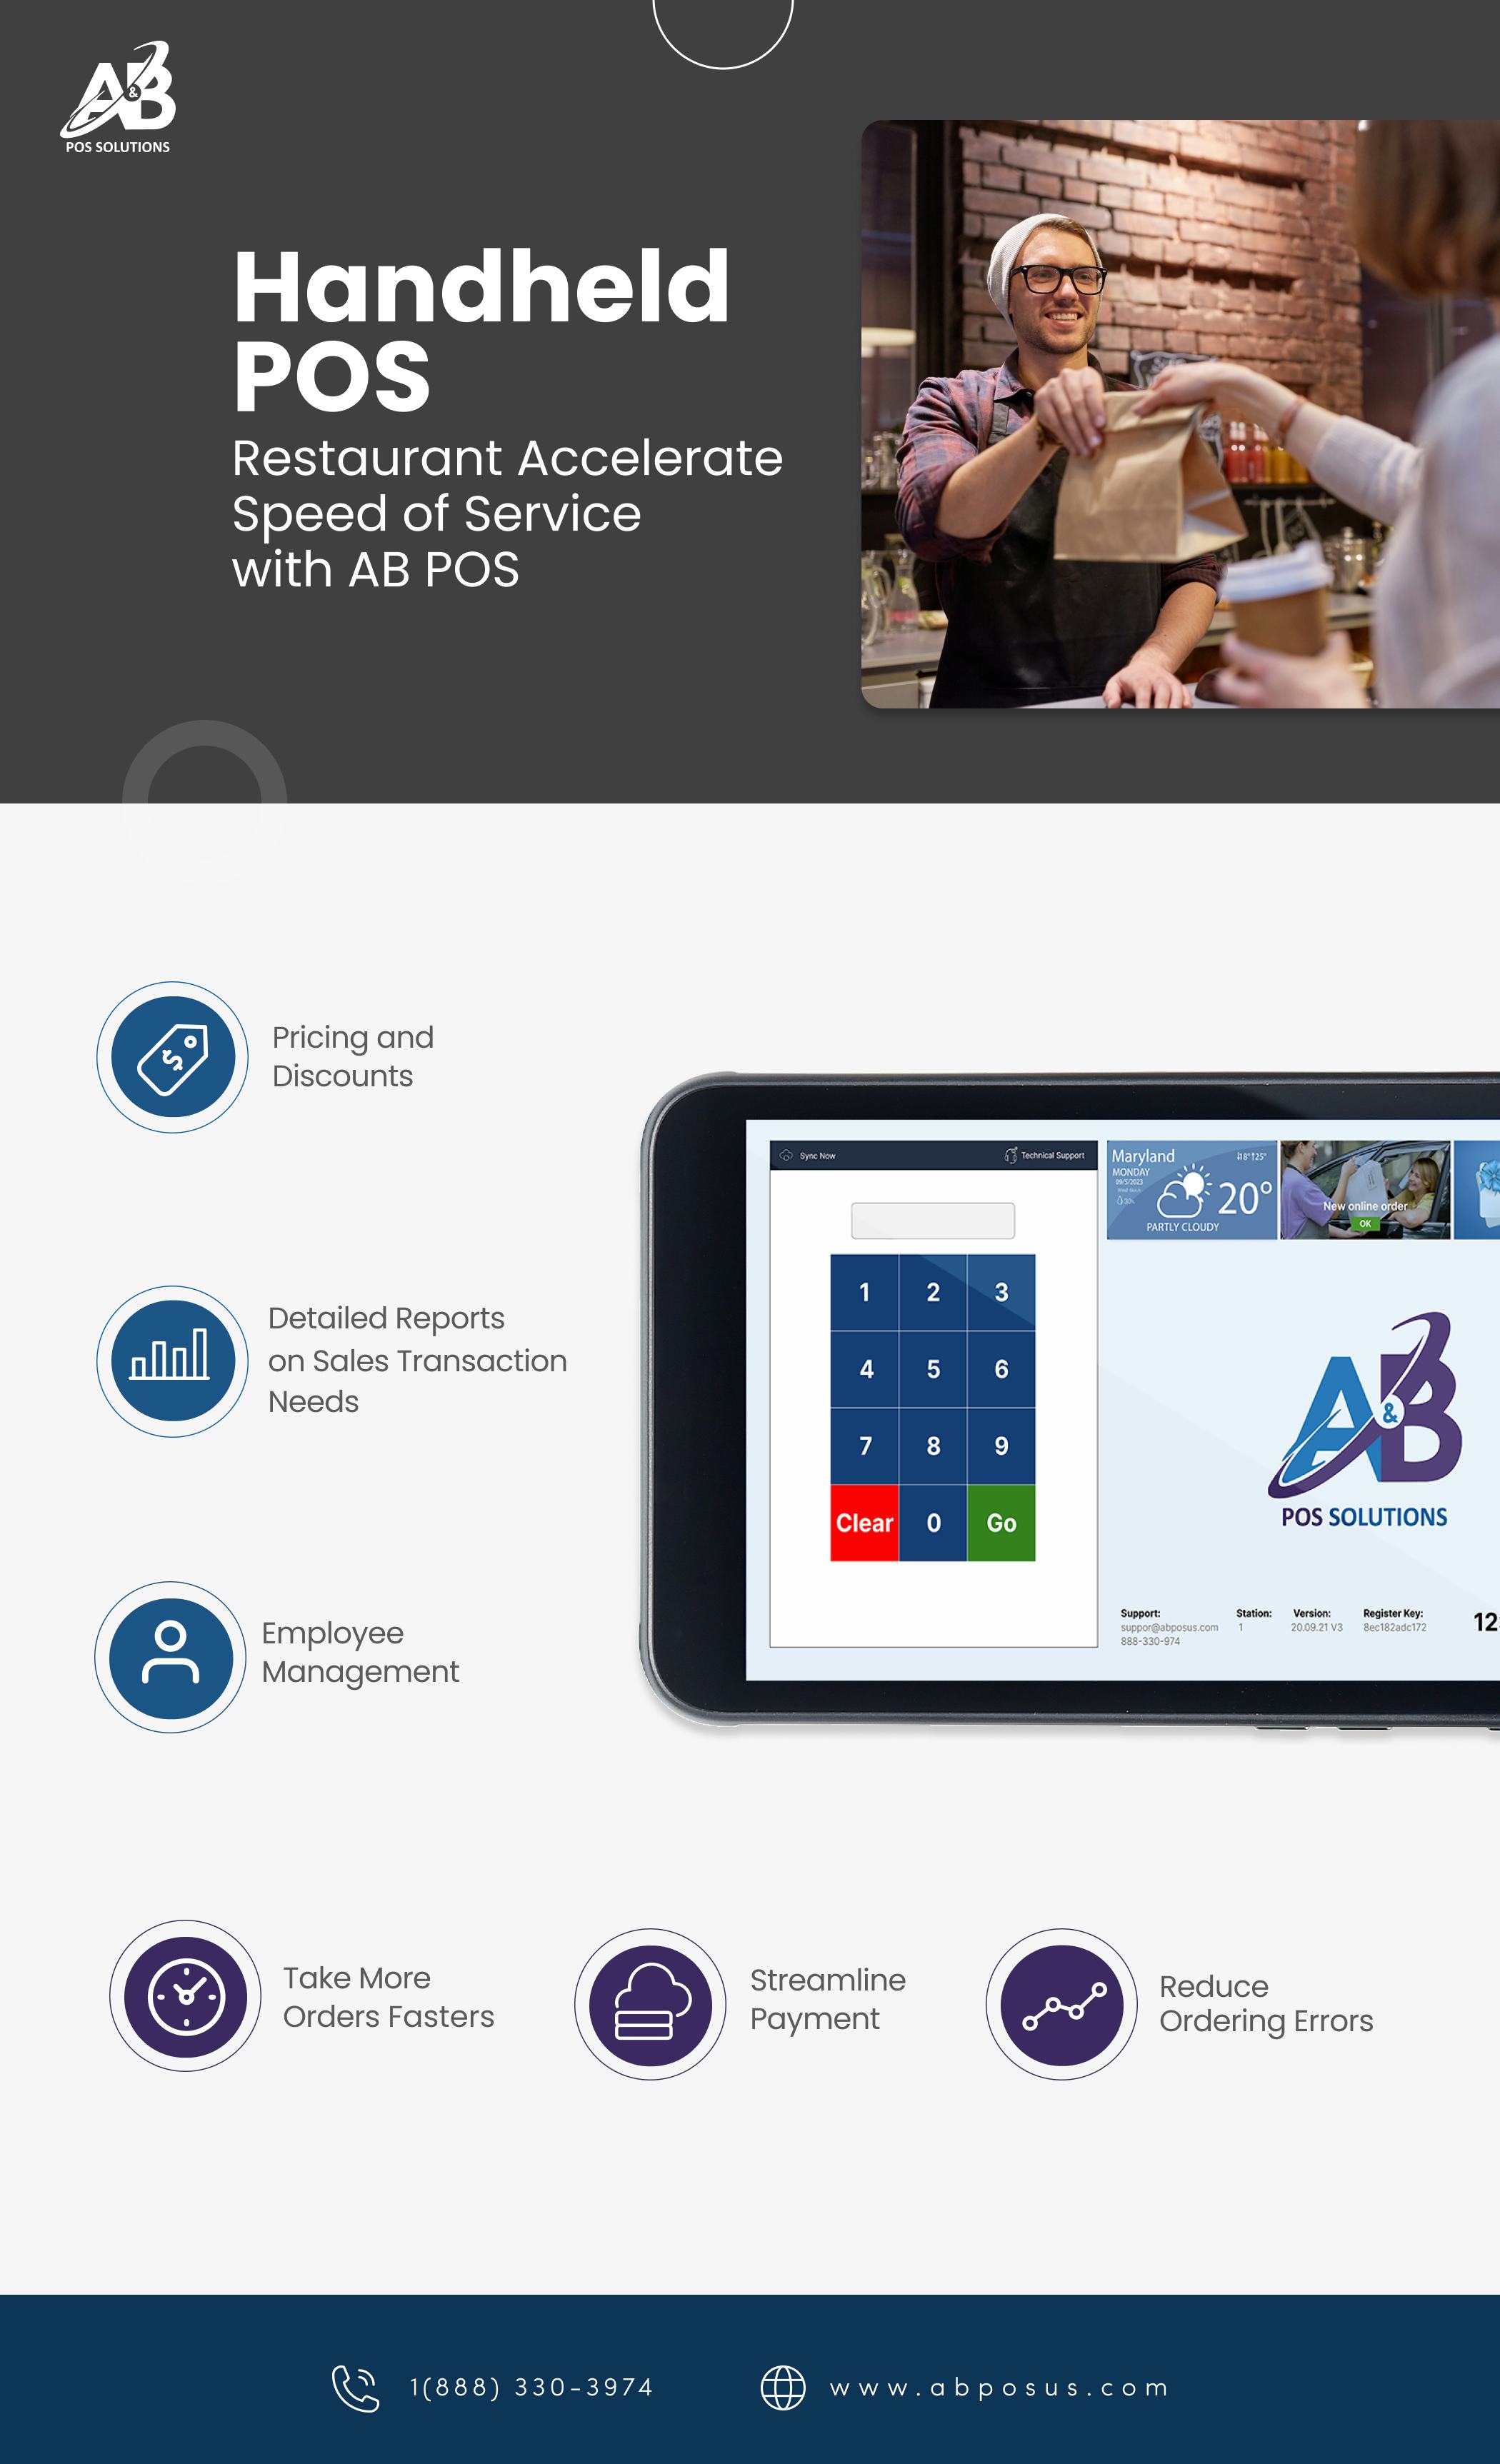 AB POS Software - A fully integrated Handheld POS system designed and built for restaurants.